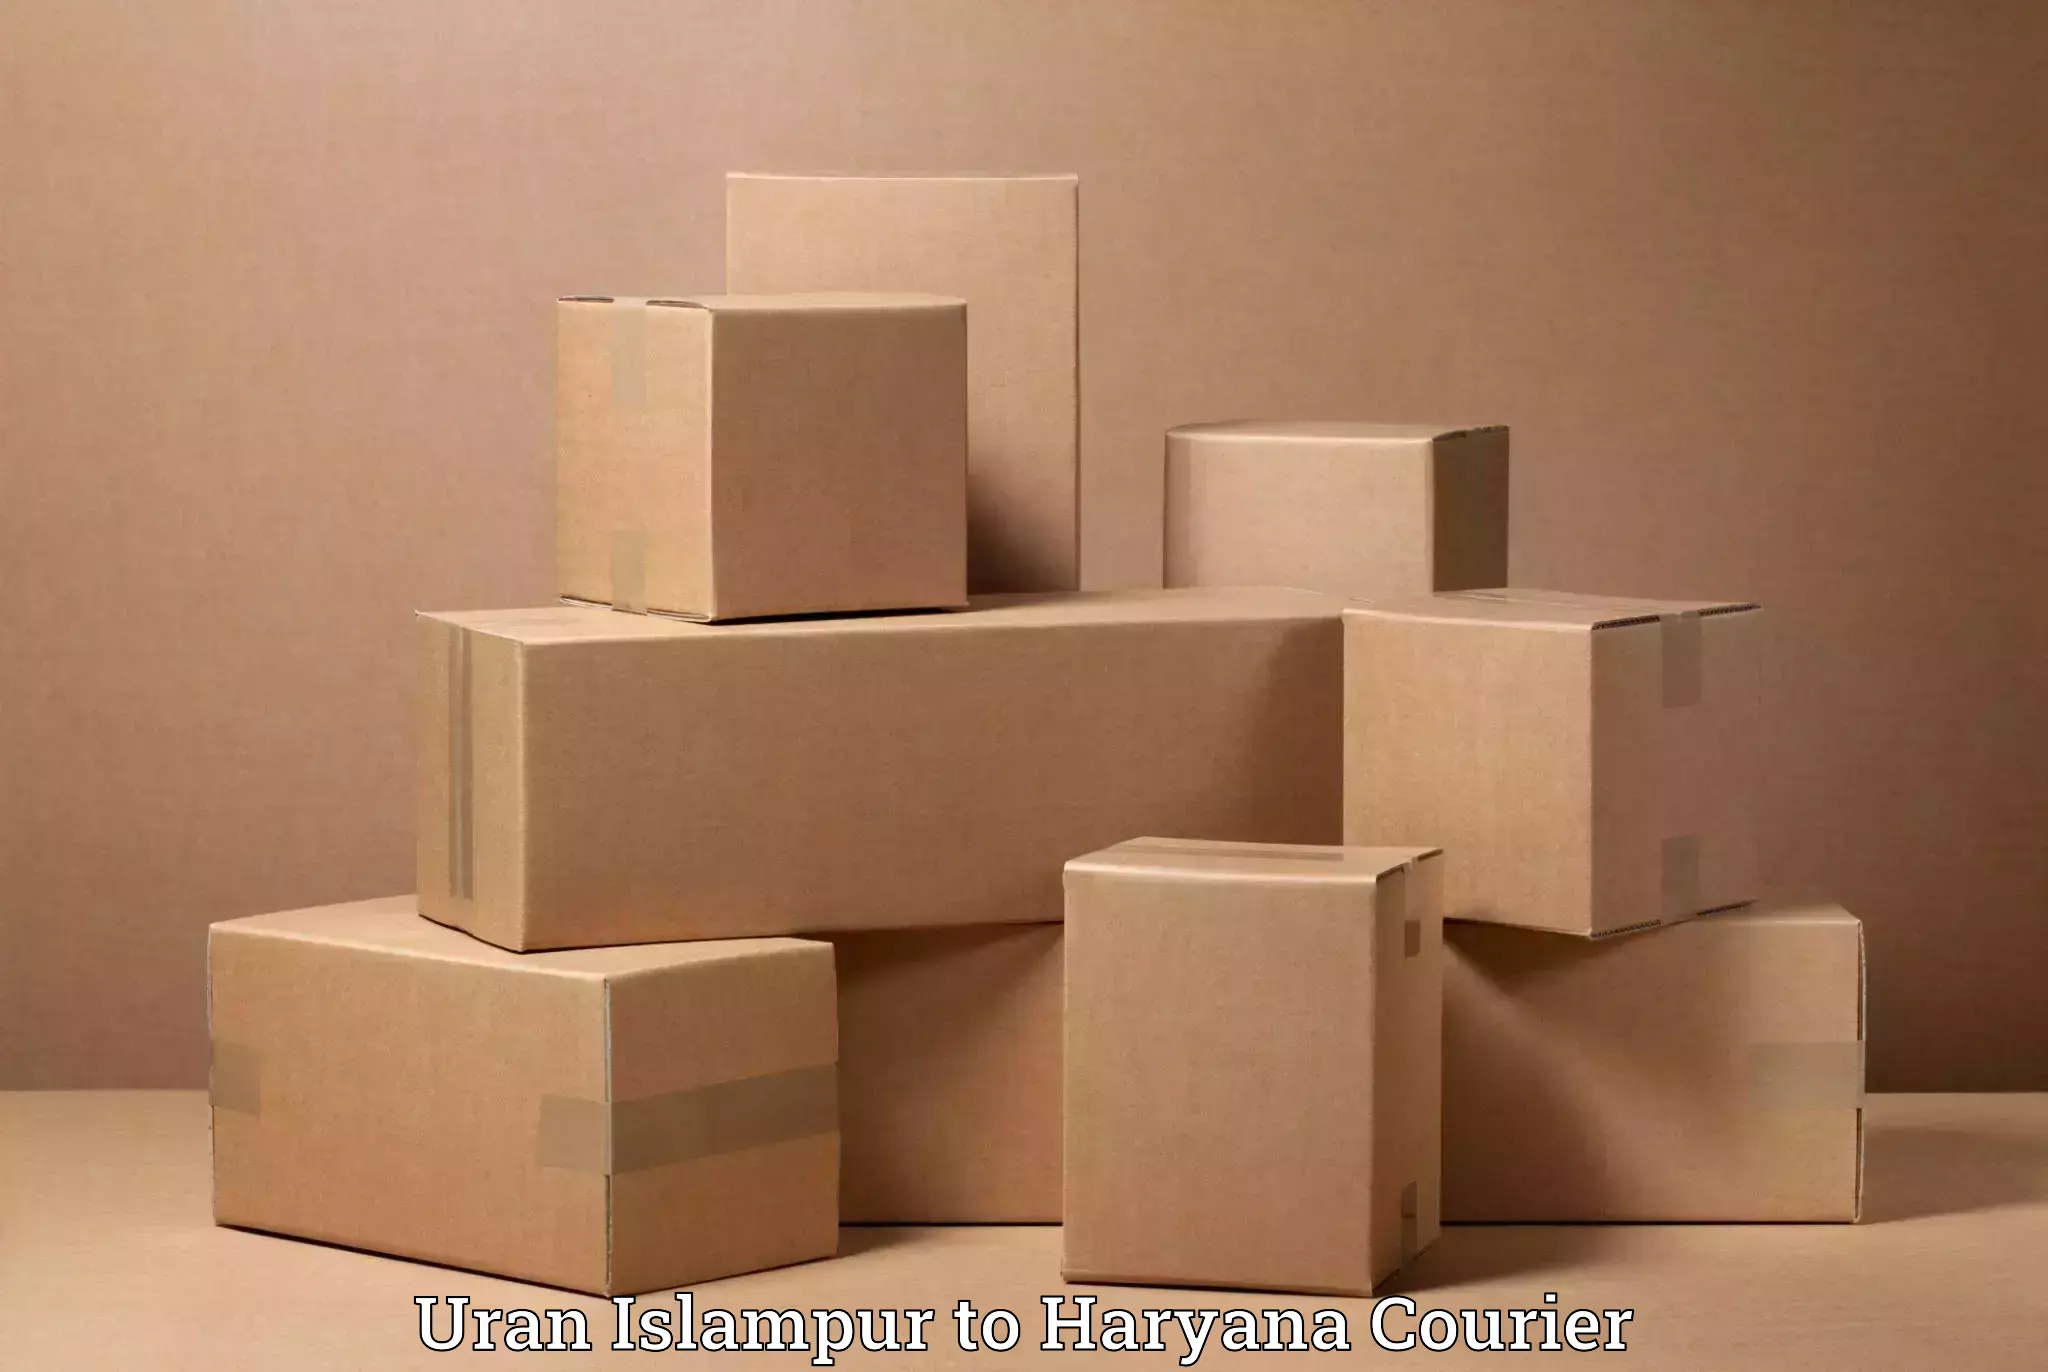 Professional relocation services Uran Islampur to Haryana